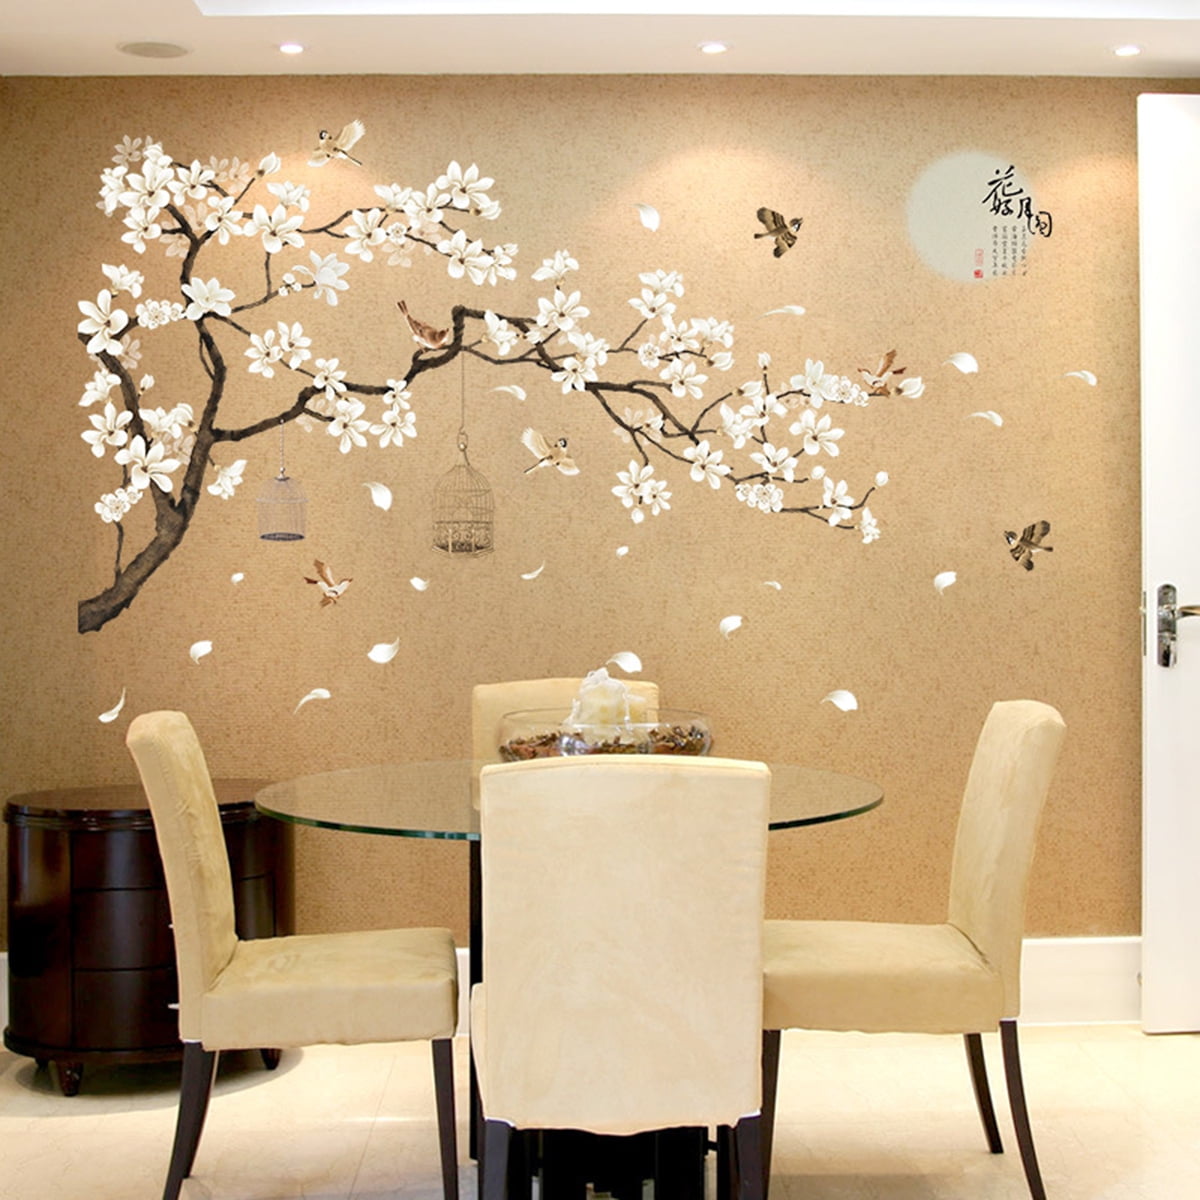 Blossom Flower Tree Branch Wall Stickers Cherry Blossom Decals Mural Home Decor 